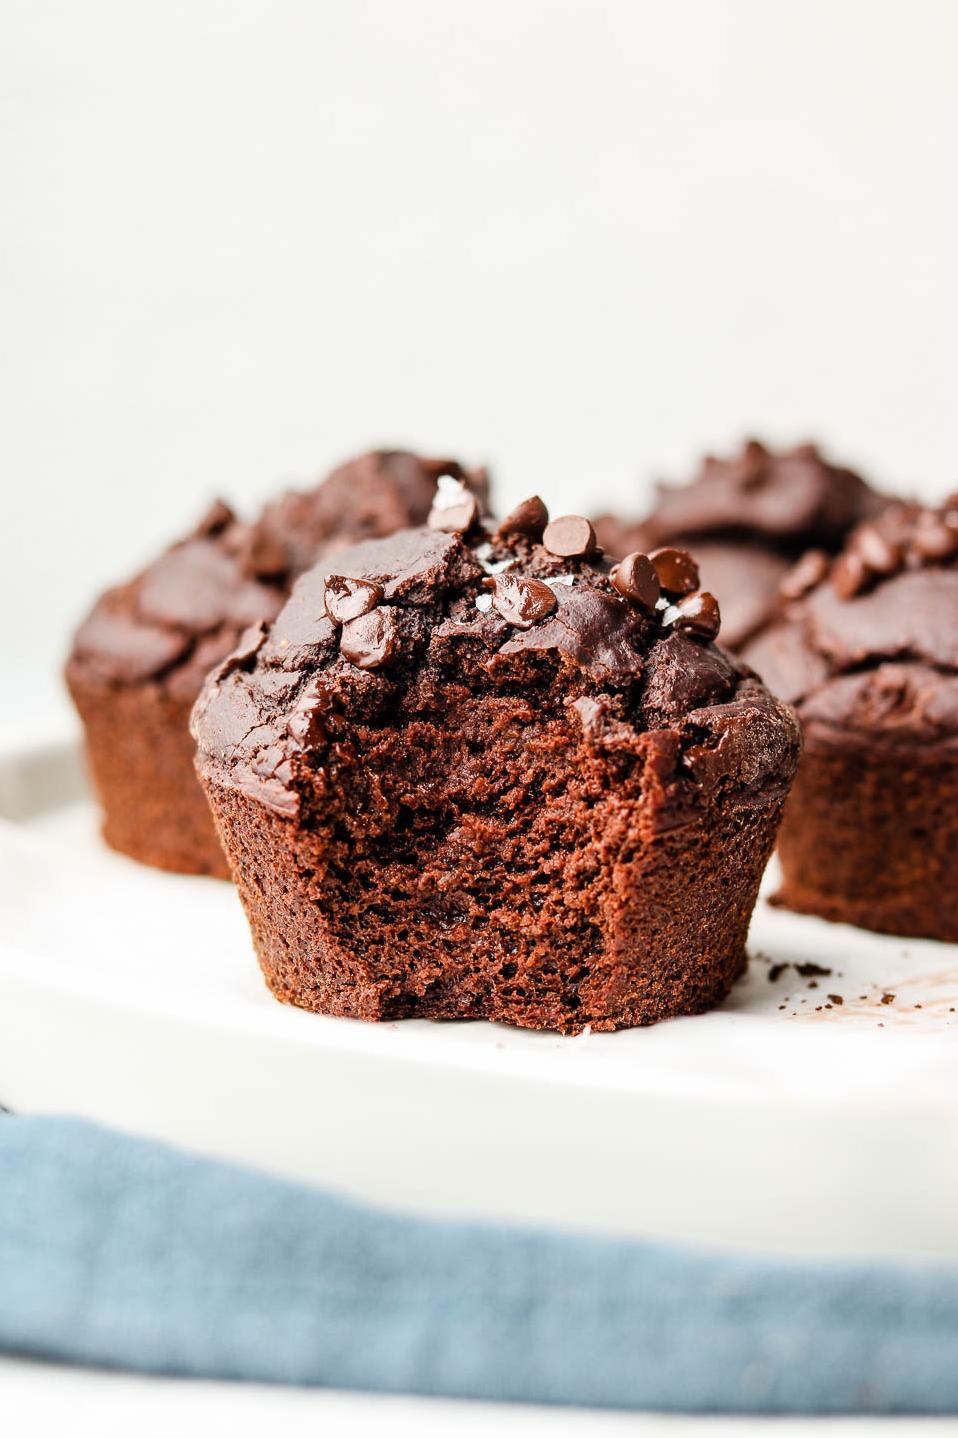  These muffins are like a warm hug on a rainy day.